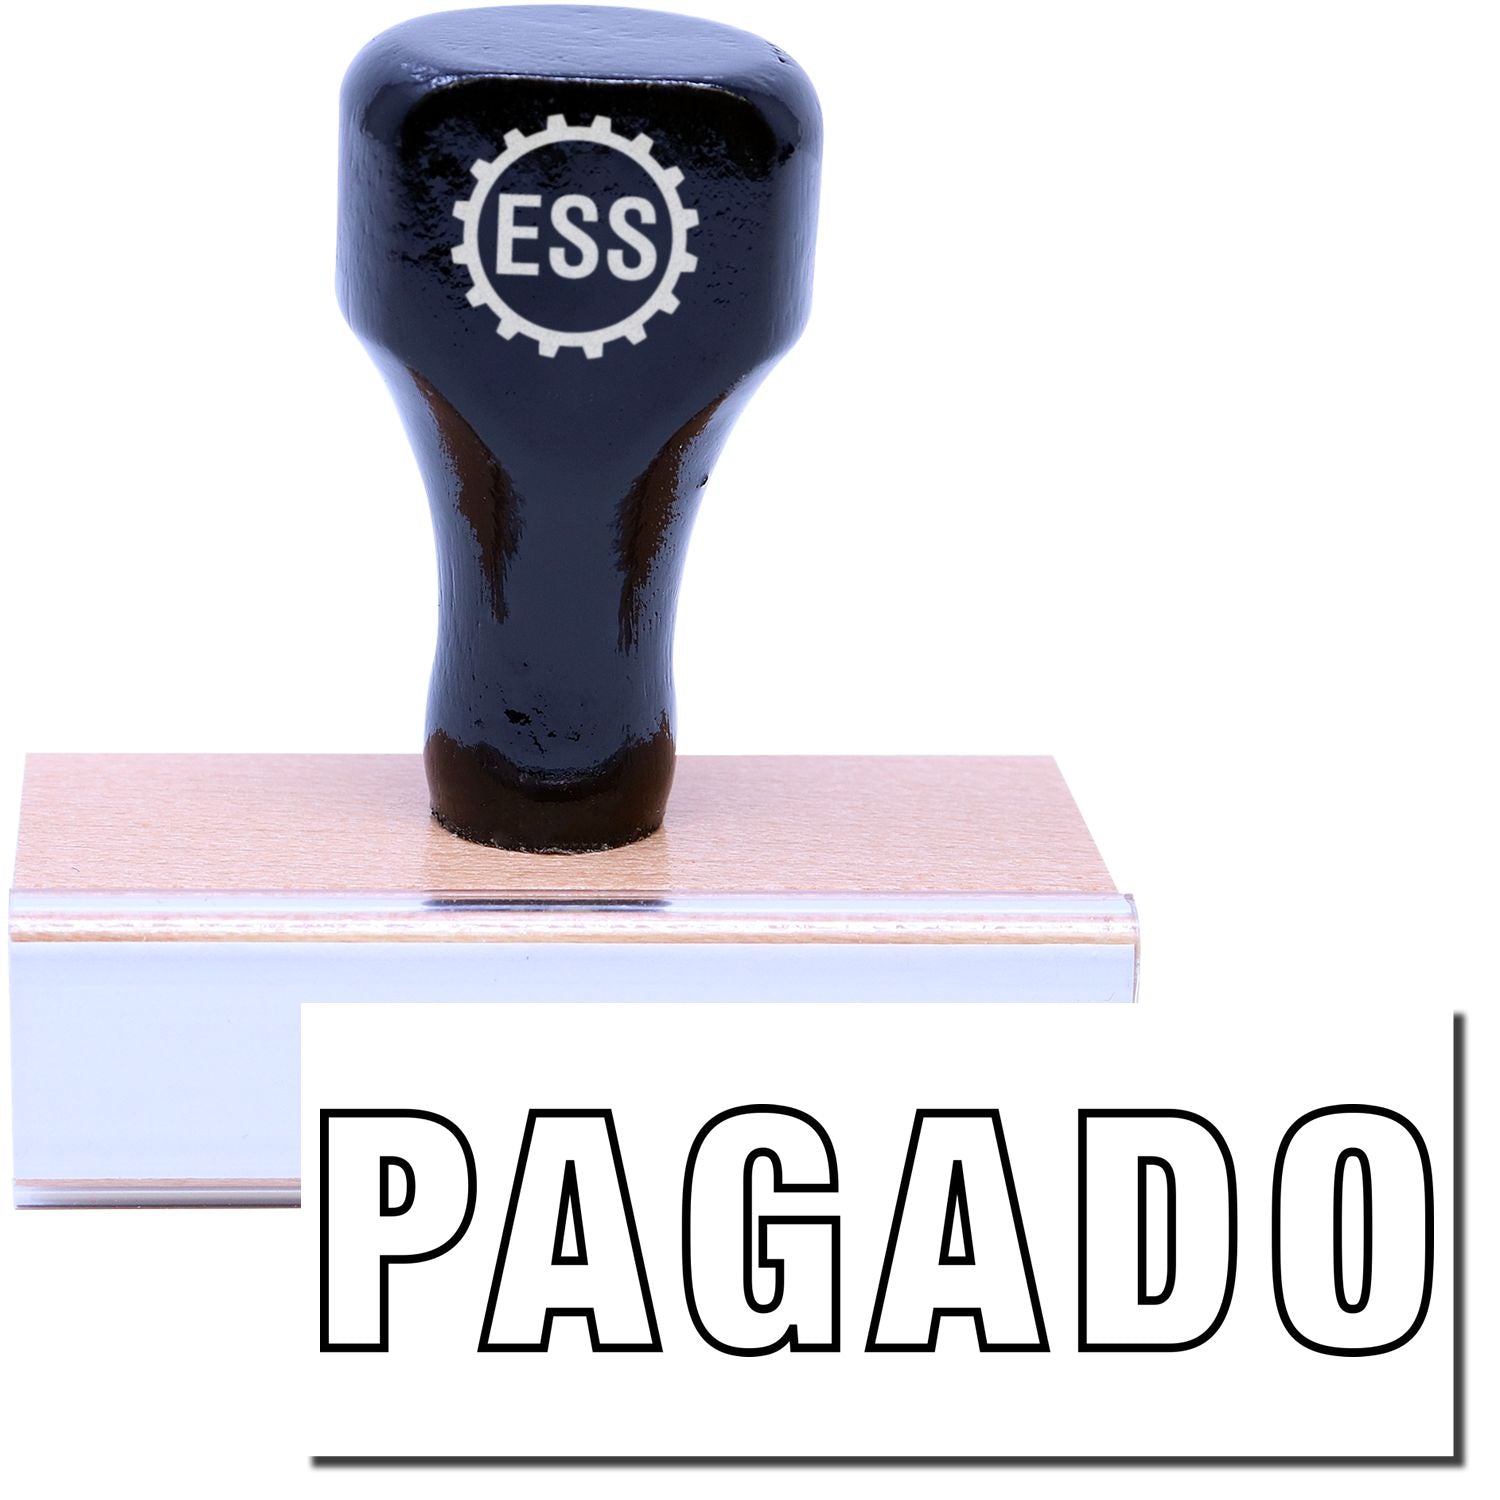 A stock office rubber stamp with a stamped image showing how the text "PAGADO" in an outline font is displayed after stamping.